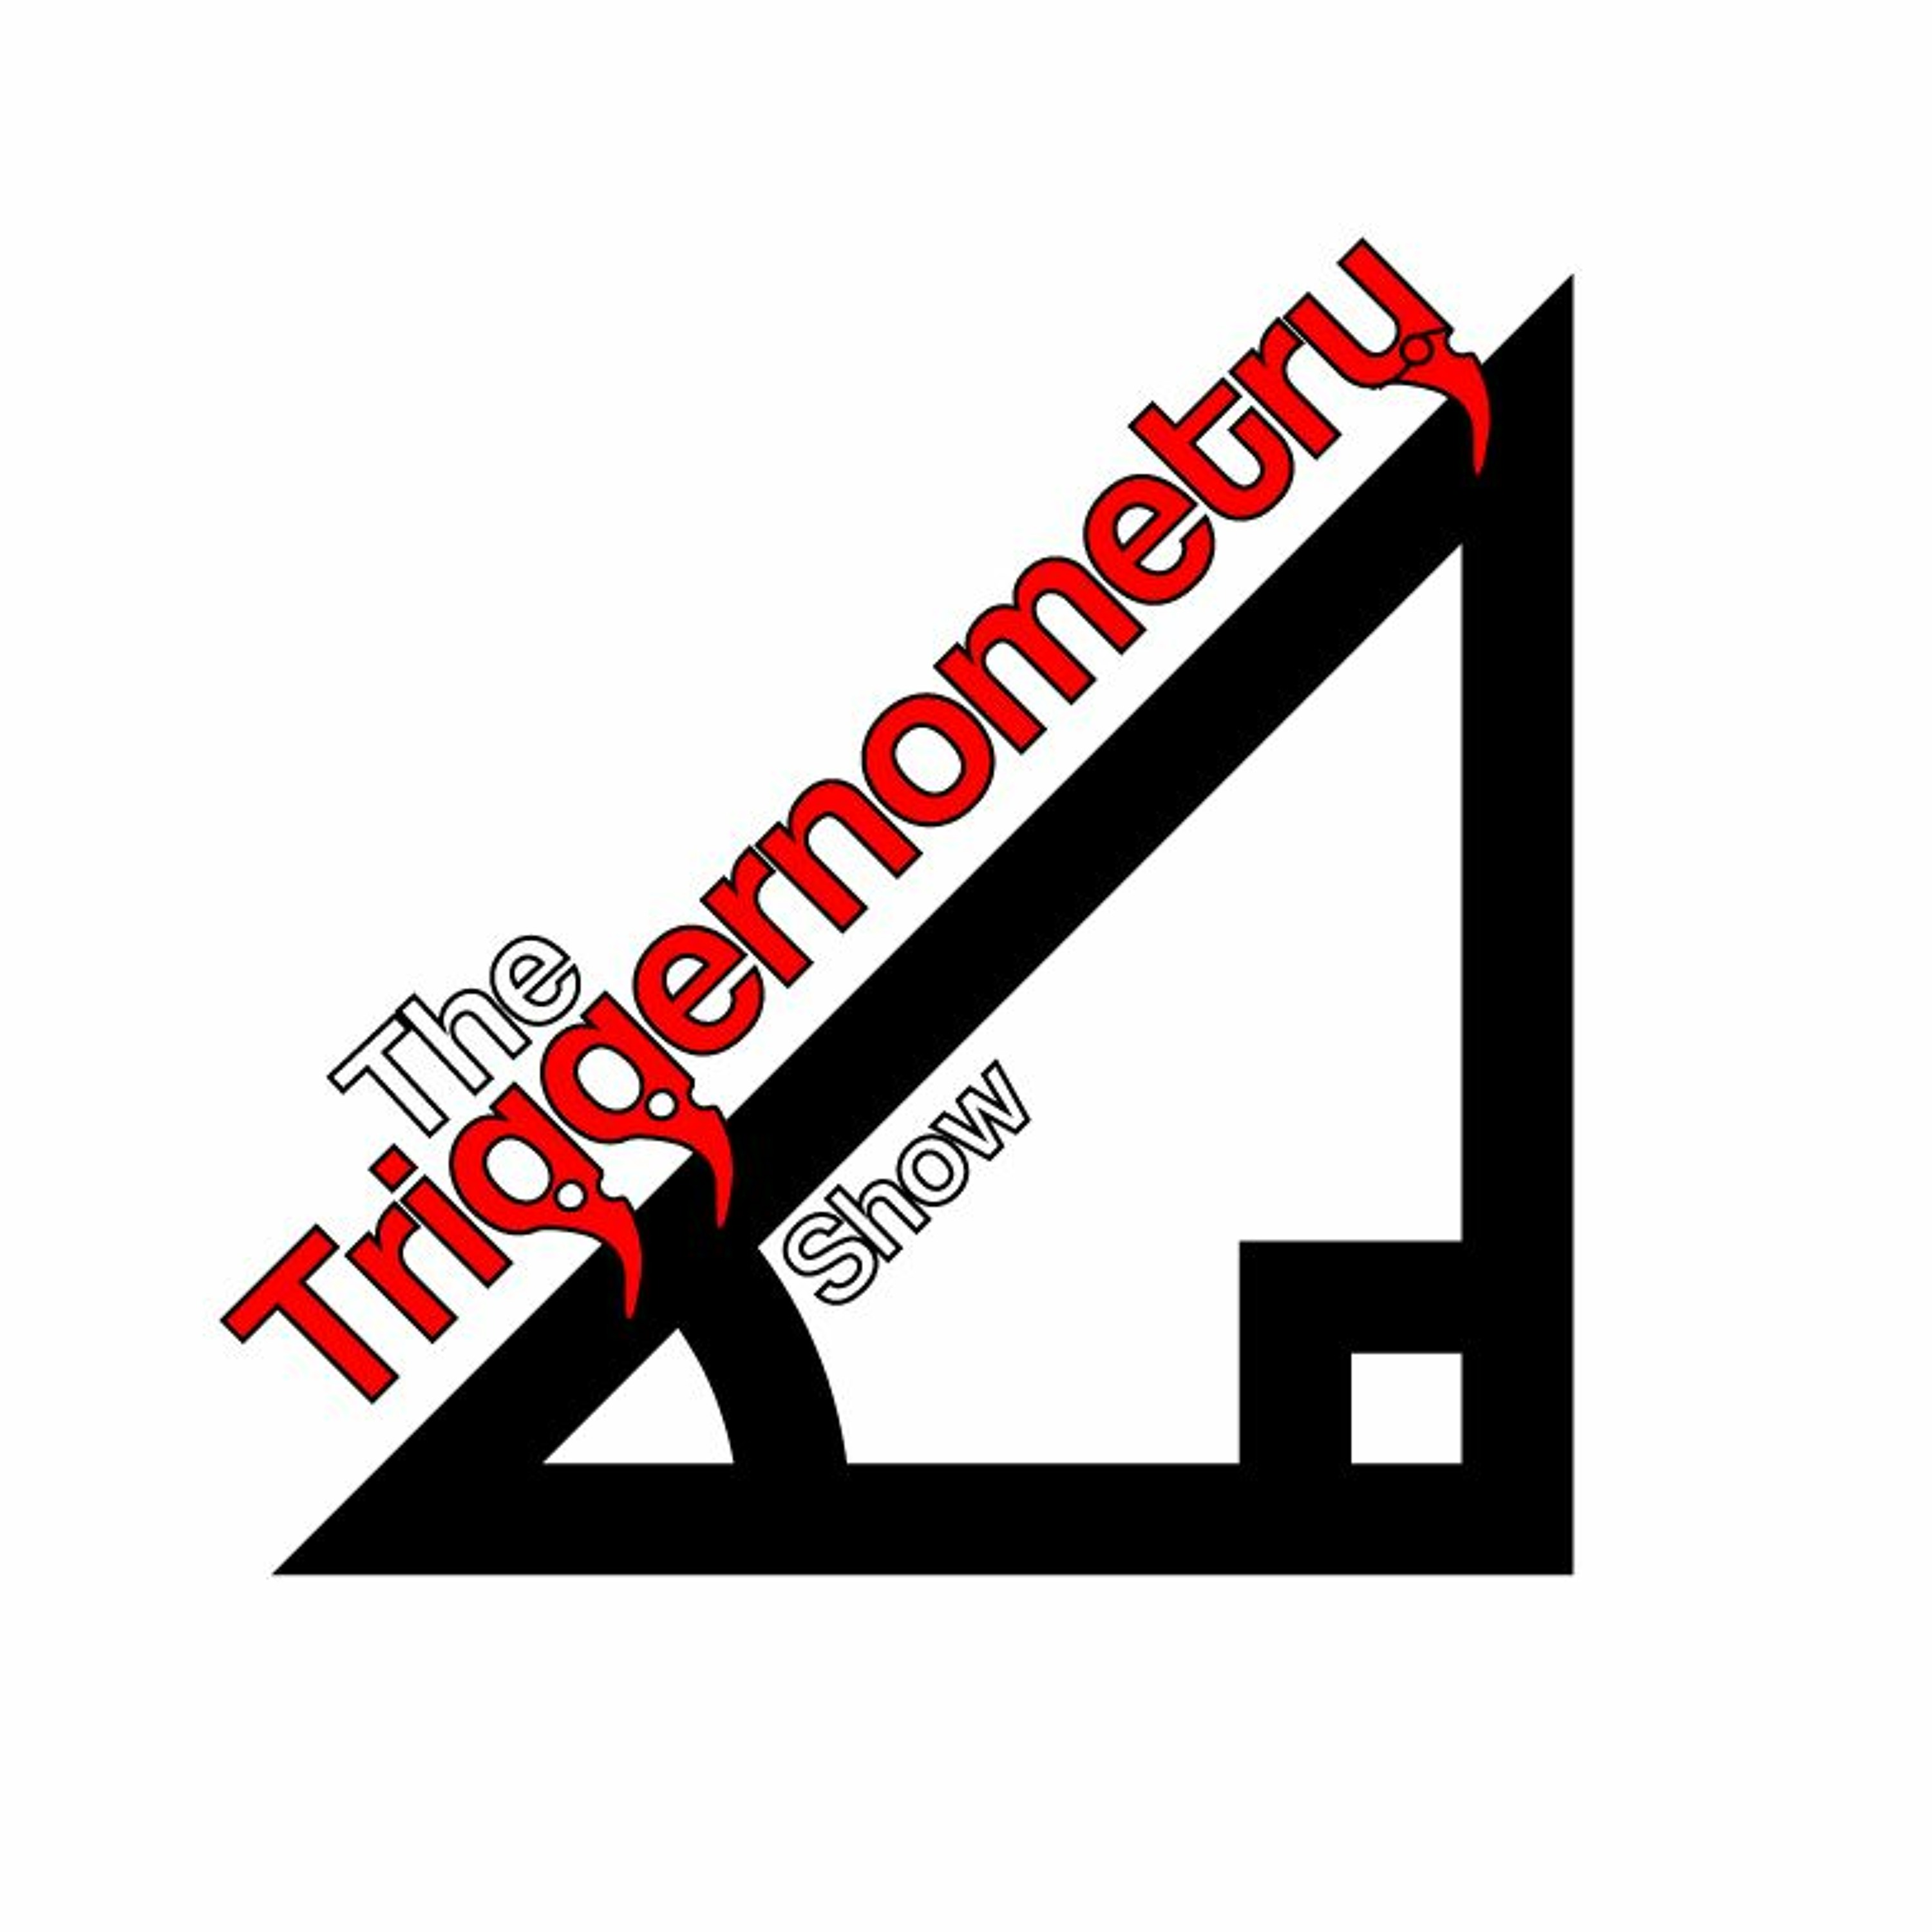 The Triggernometry Show - Robin Sharpless from Redding Reloading